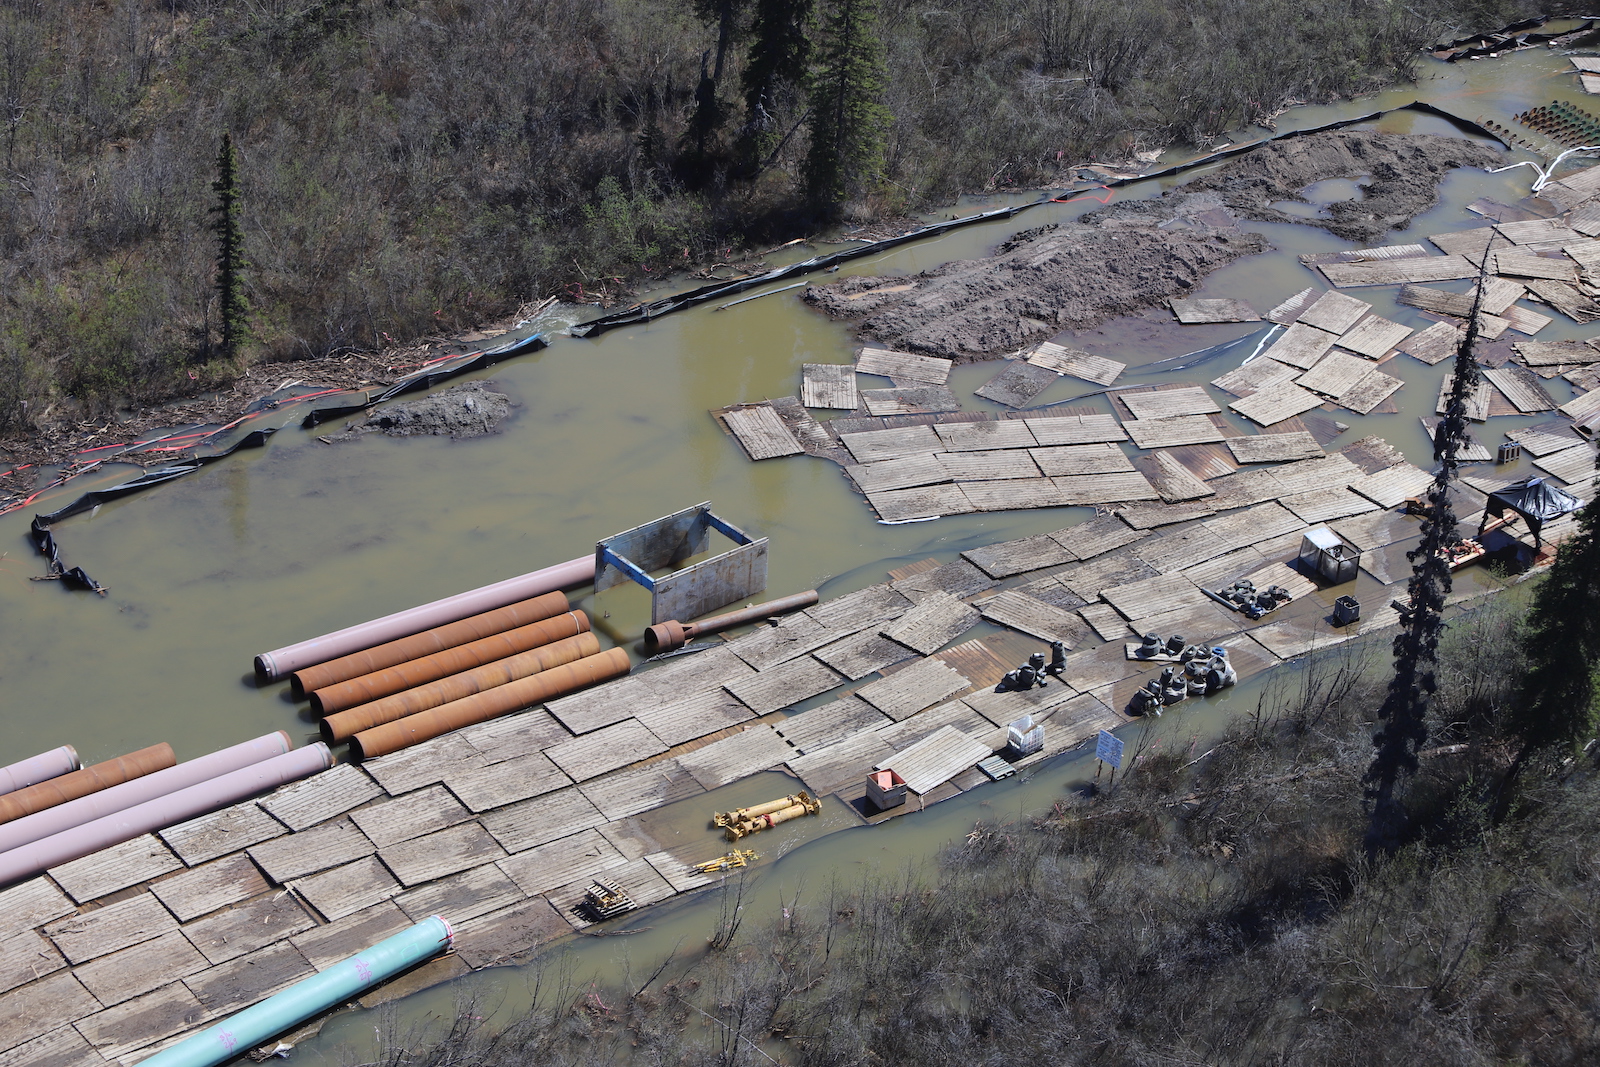 An aerial photograph shows dozens of sheets of plywood, heavy machinery and sections of metal pipe surrounded by brown water.